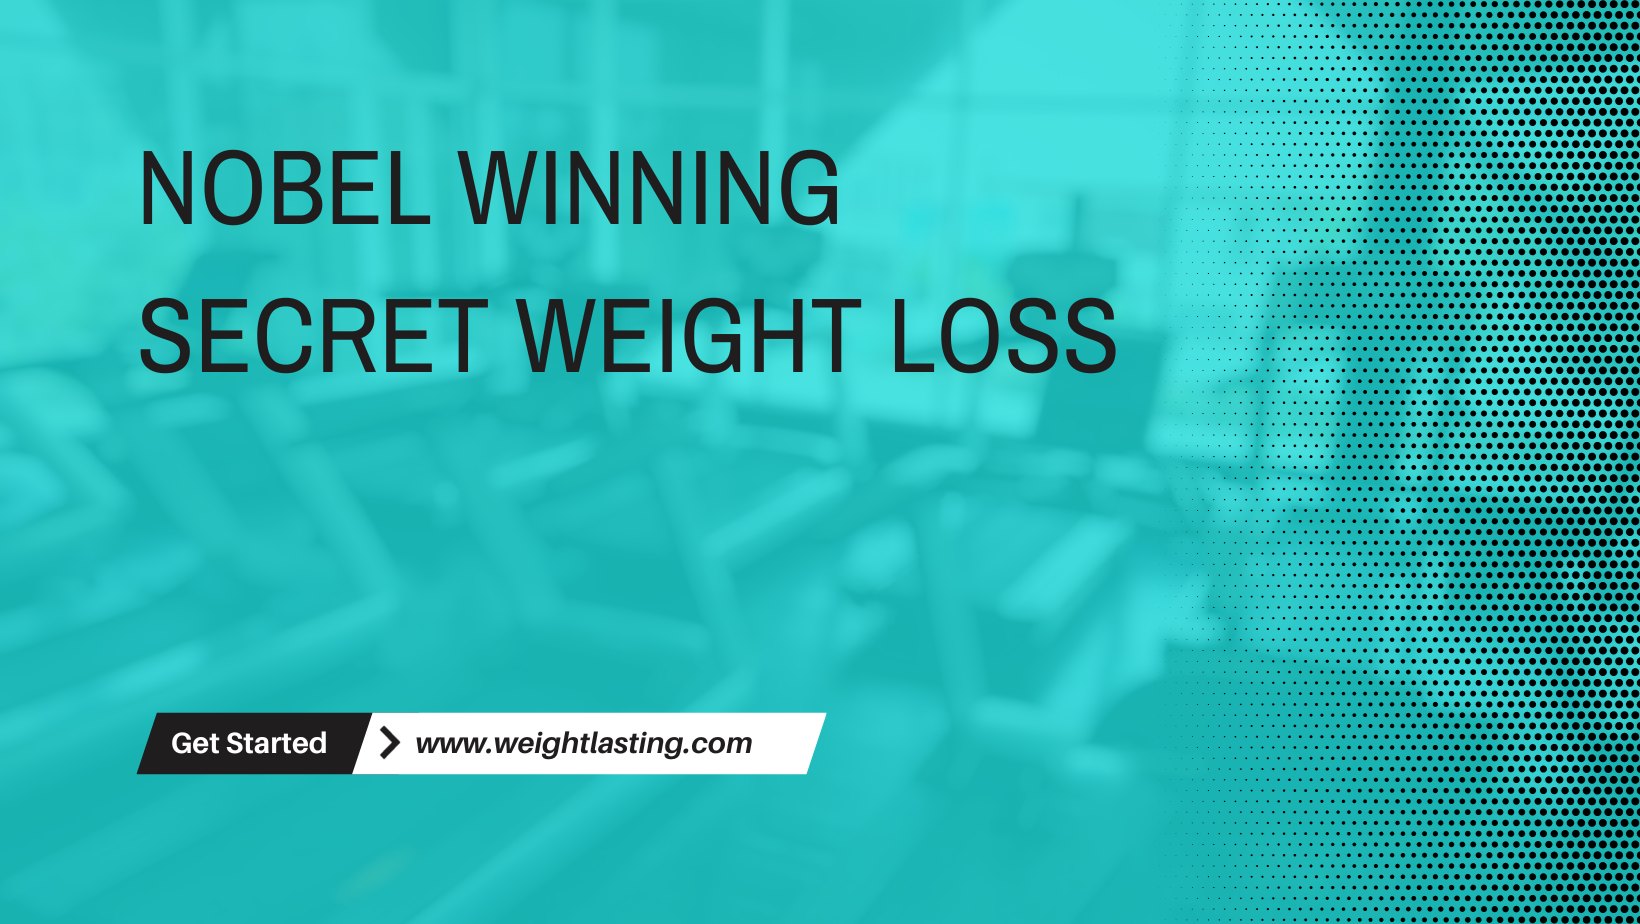 FastLean Pro Reviews – Does This Nobel Winning Secret Weight Loss Formula Really Work?